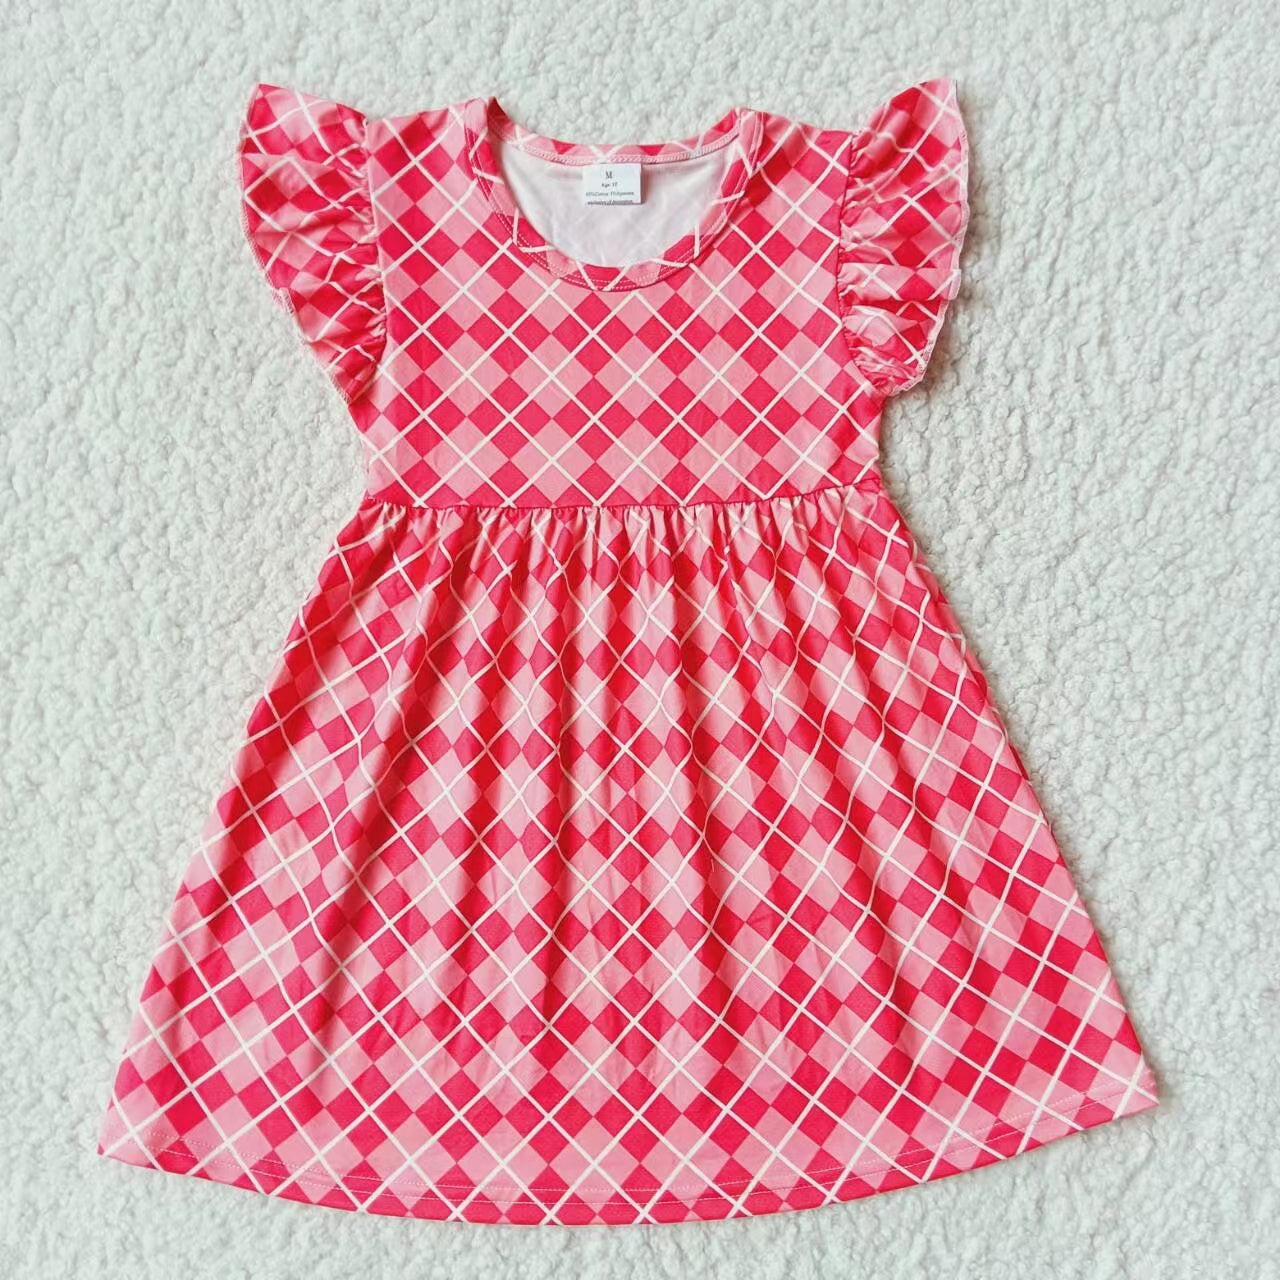 Baby girls pink red shape pearl dresses